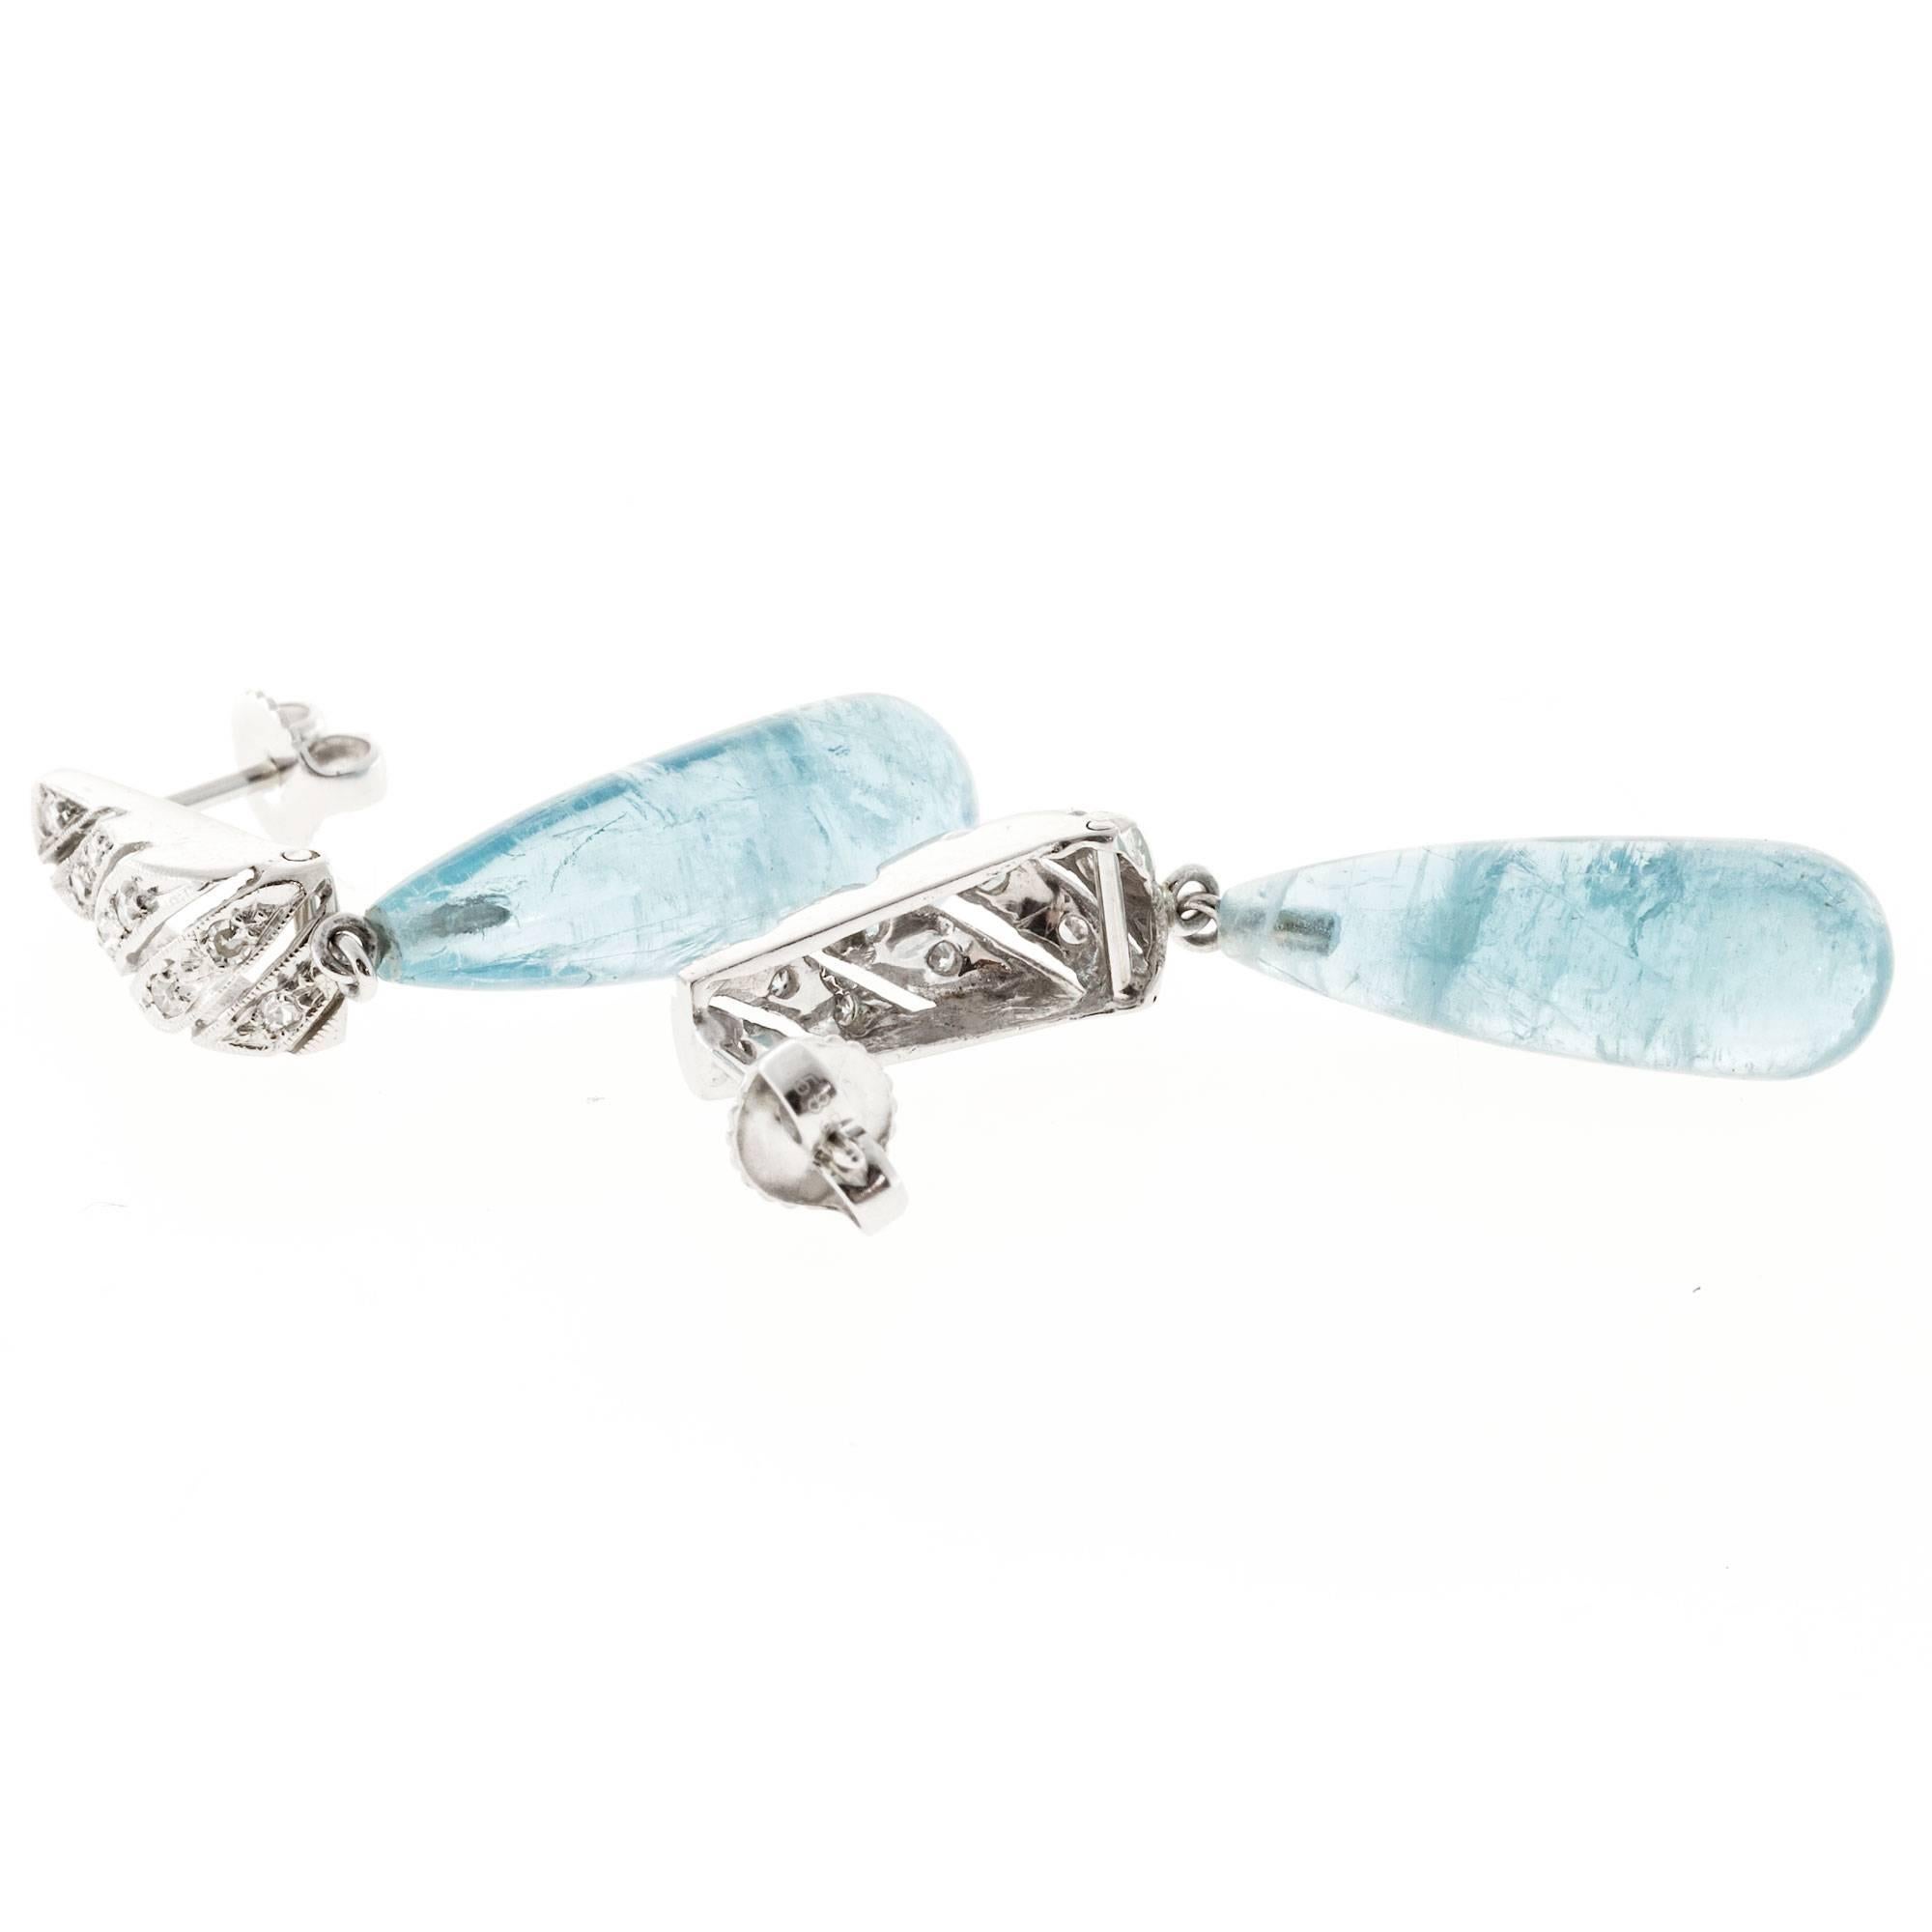 1930-1940 handmade 14k white gold earrings with pierced open work bead set tops and natural untreated Aquamarine dangles with natural inclusions and excellent natural untreated color.

2 Natural blue tear drop Aquamarine, 3D natural polished,